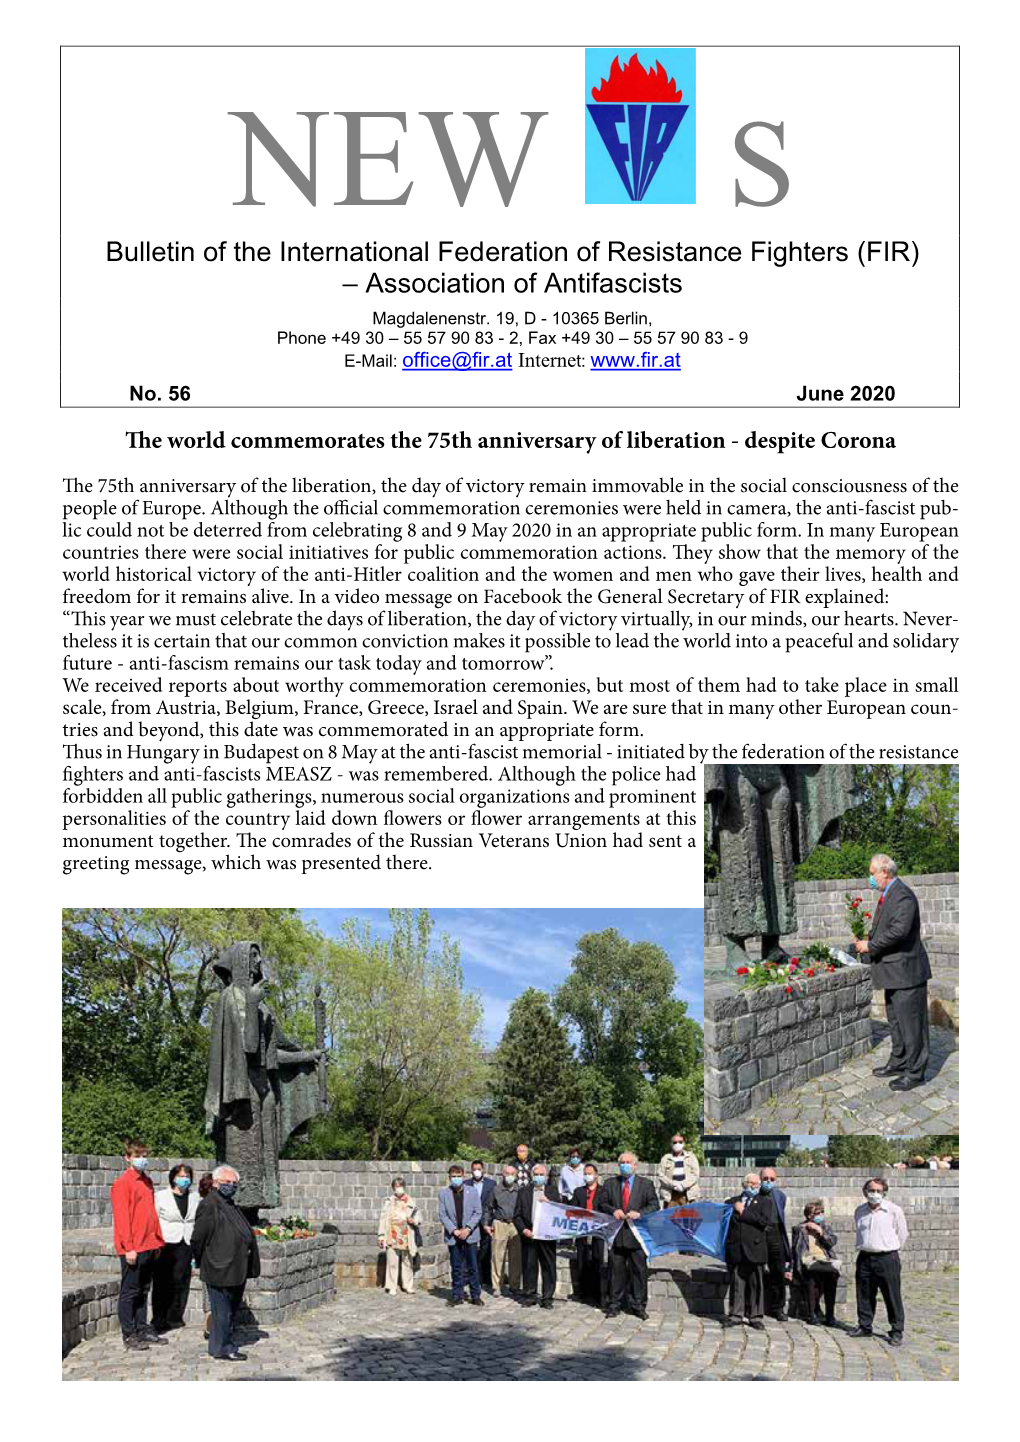 Bulletin of the International Federation of Resistance Fighters (FIR) – Association of Antifascists